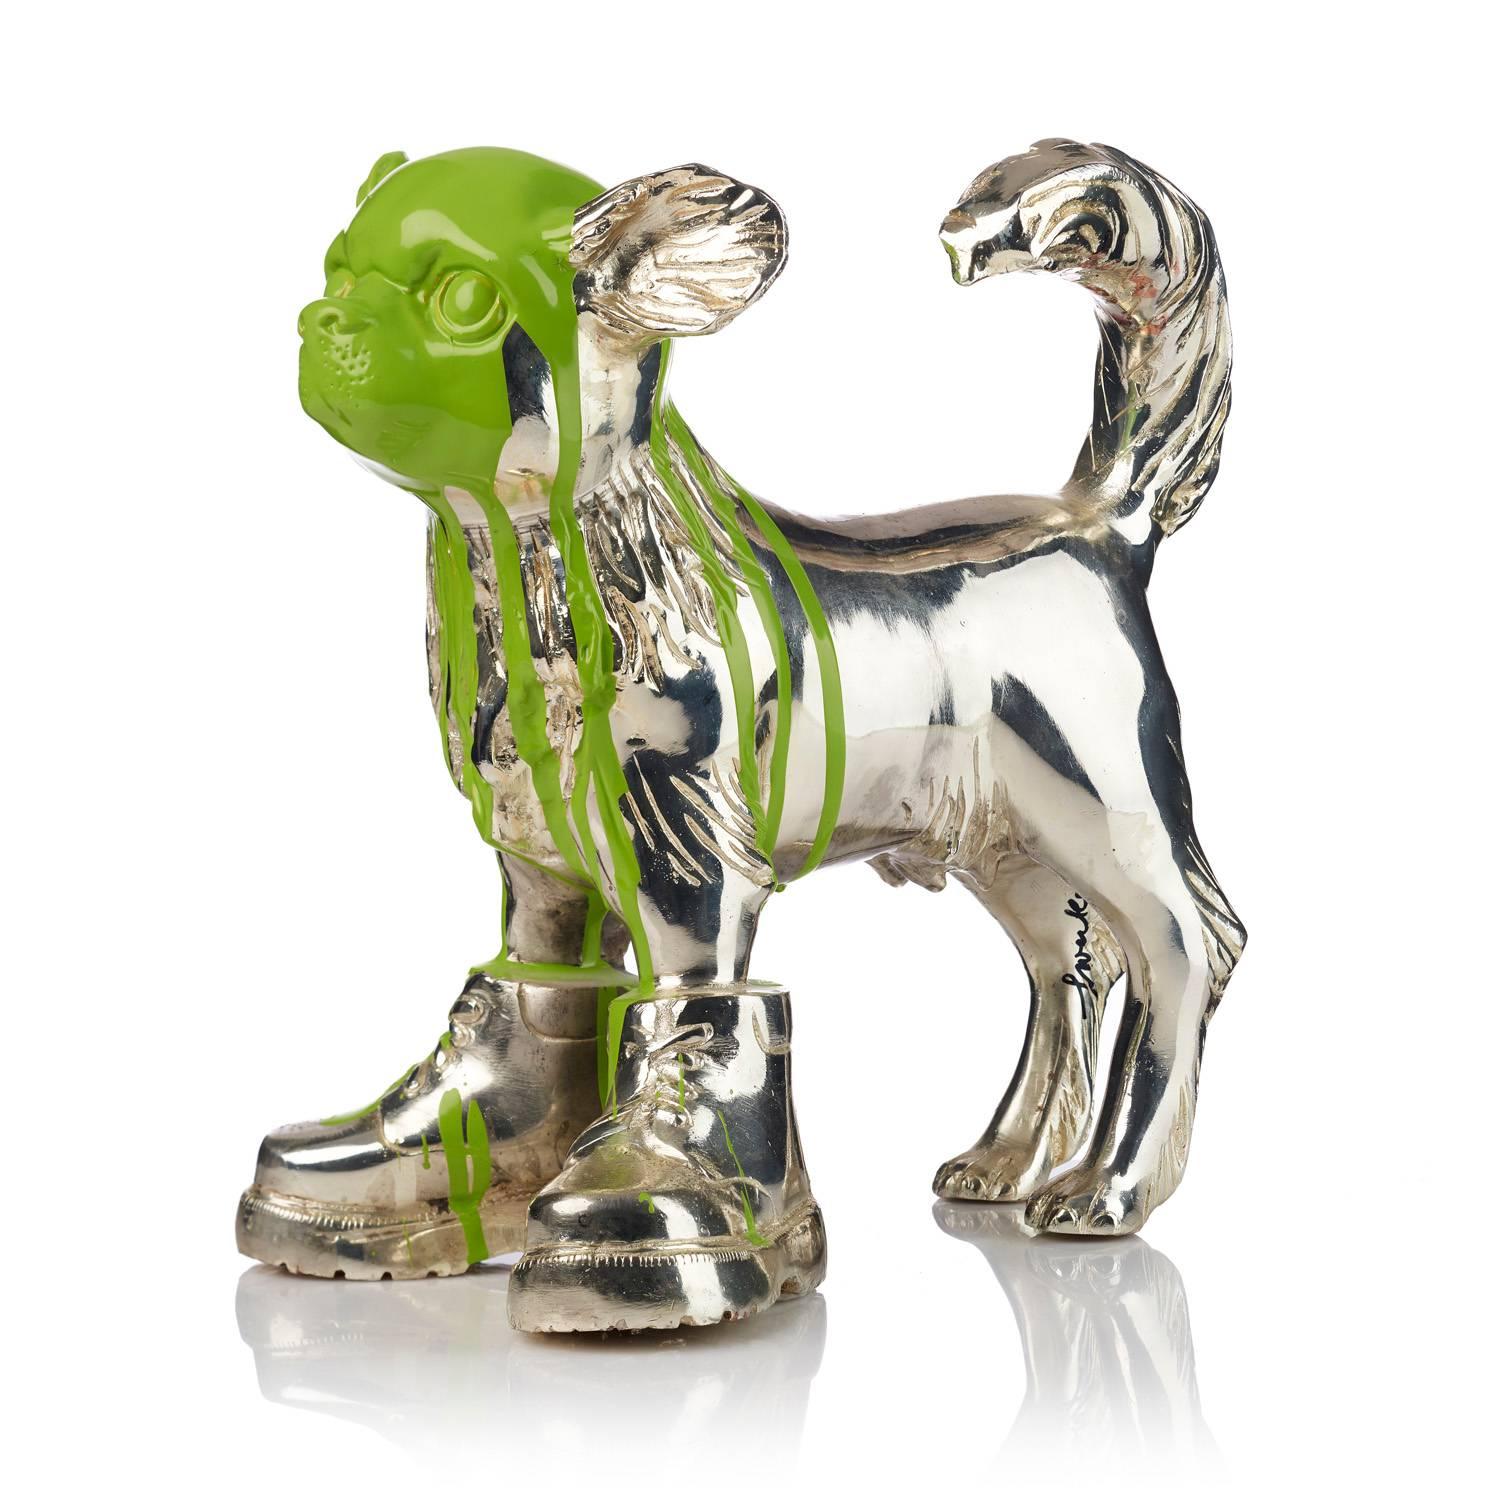 Cloned Chihuahua with colored head green - Sculpture by William Sweetlove